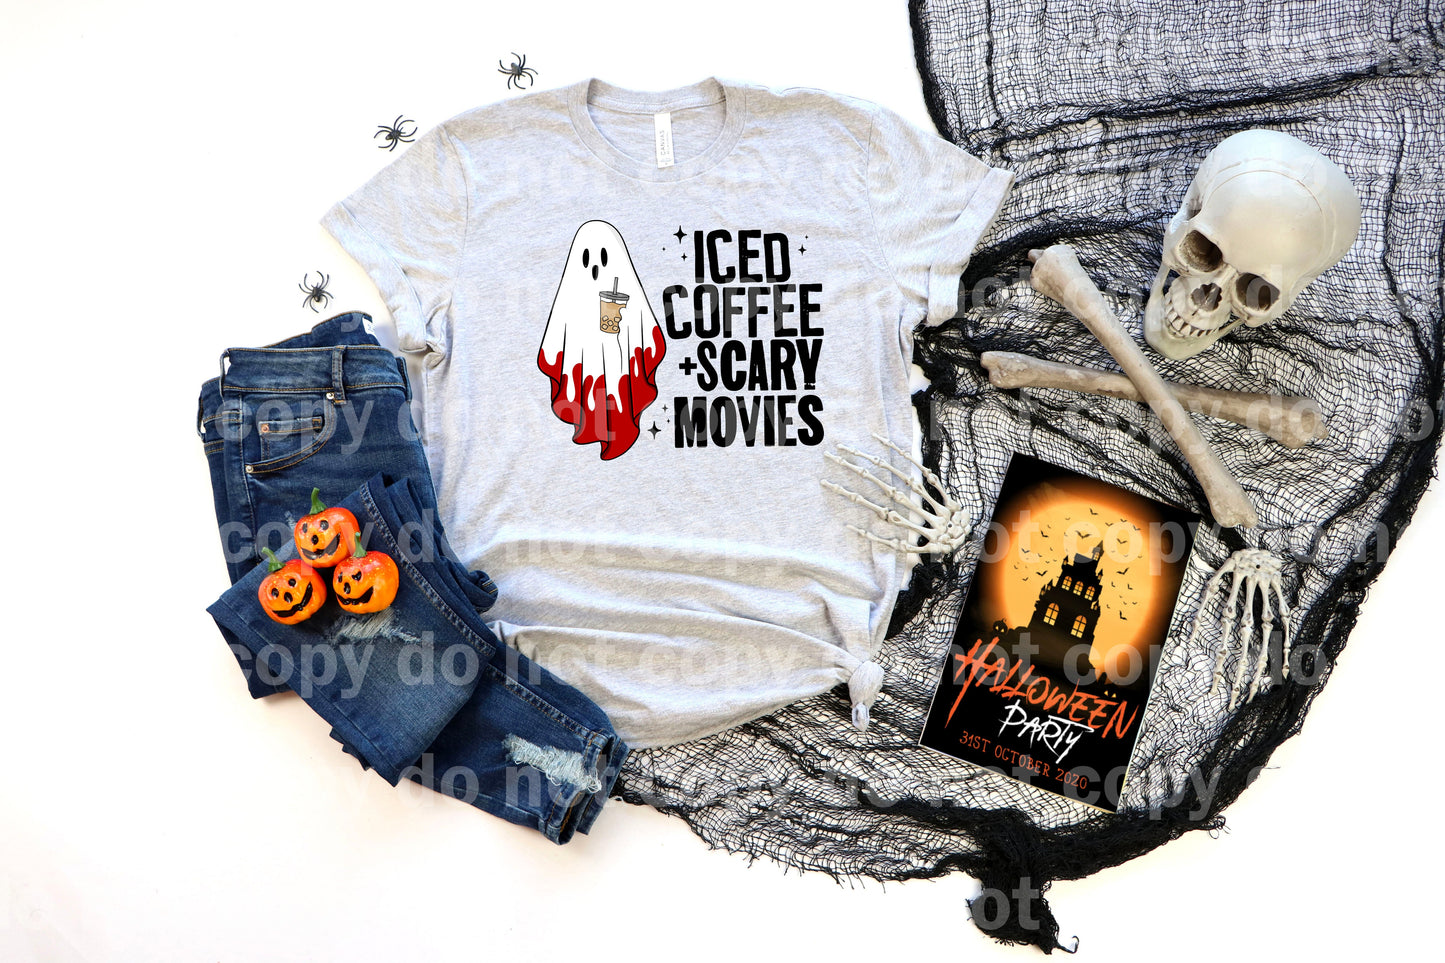 Iced Coffee Plus Scary Movies Dream Print or Sublimation Print